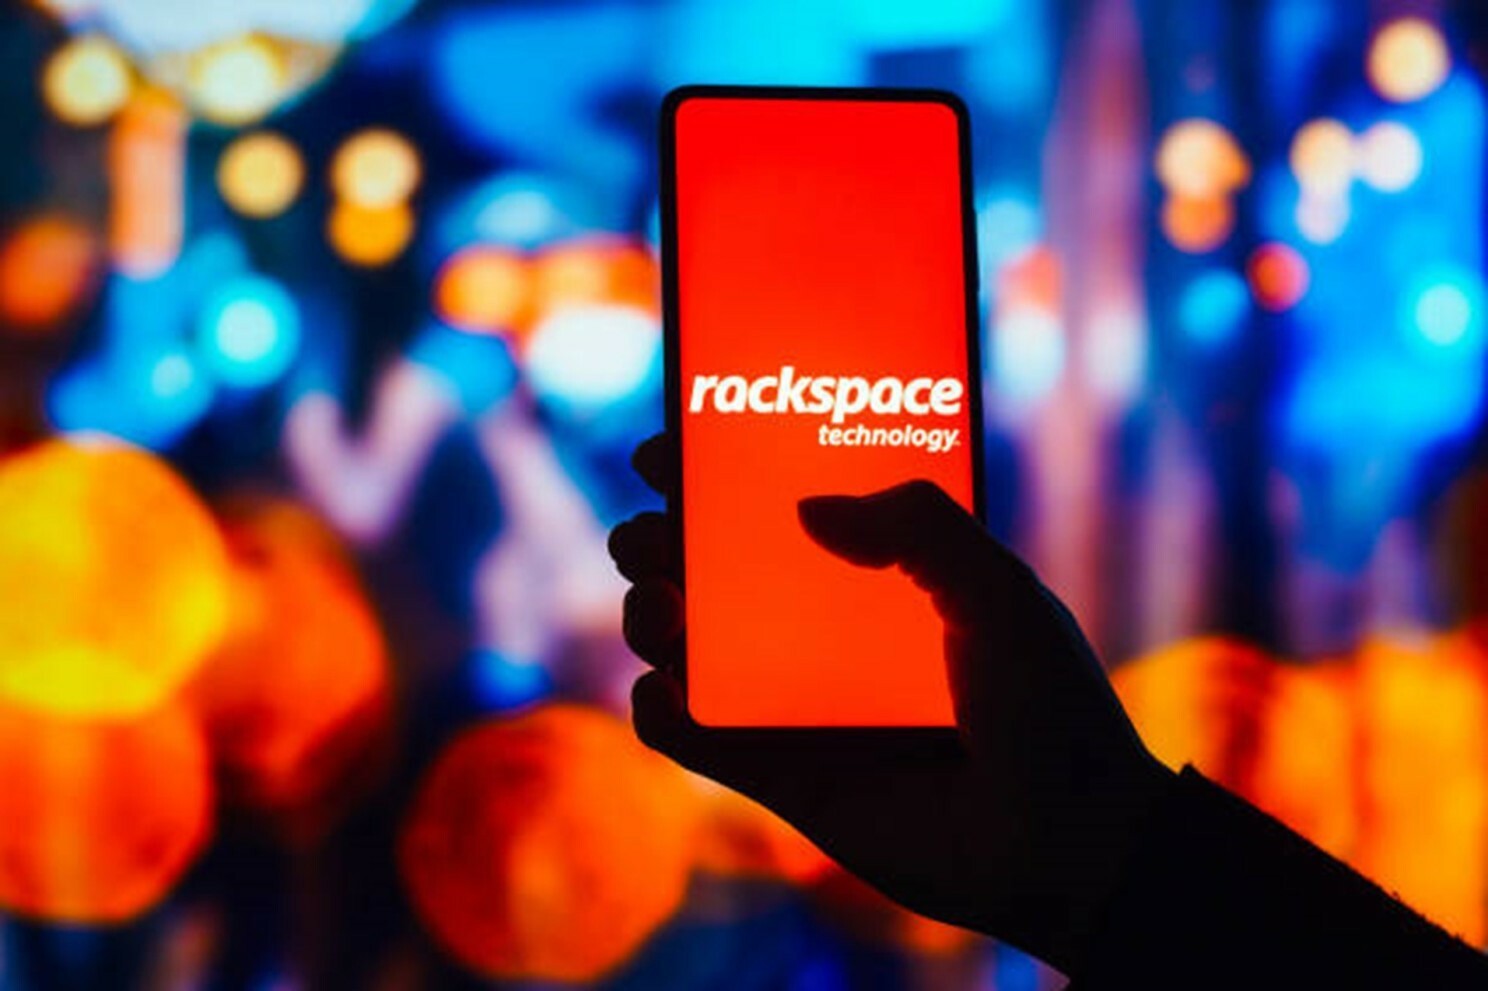 Rackspace Hosted Exchange Email Capabilities Still Offline After Ransomware Attack